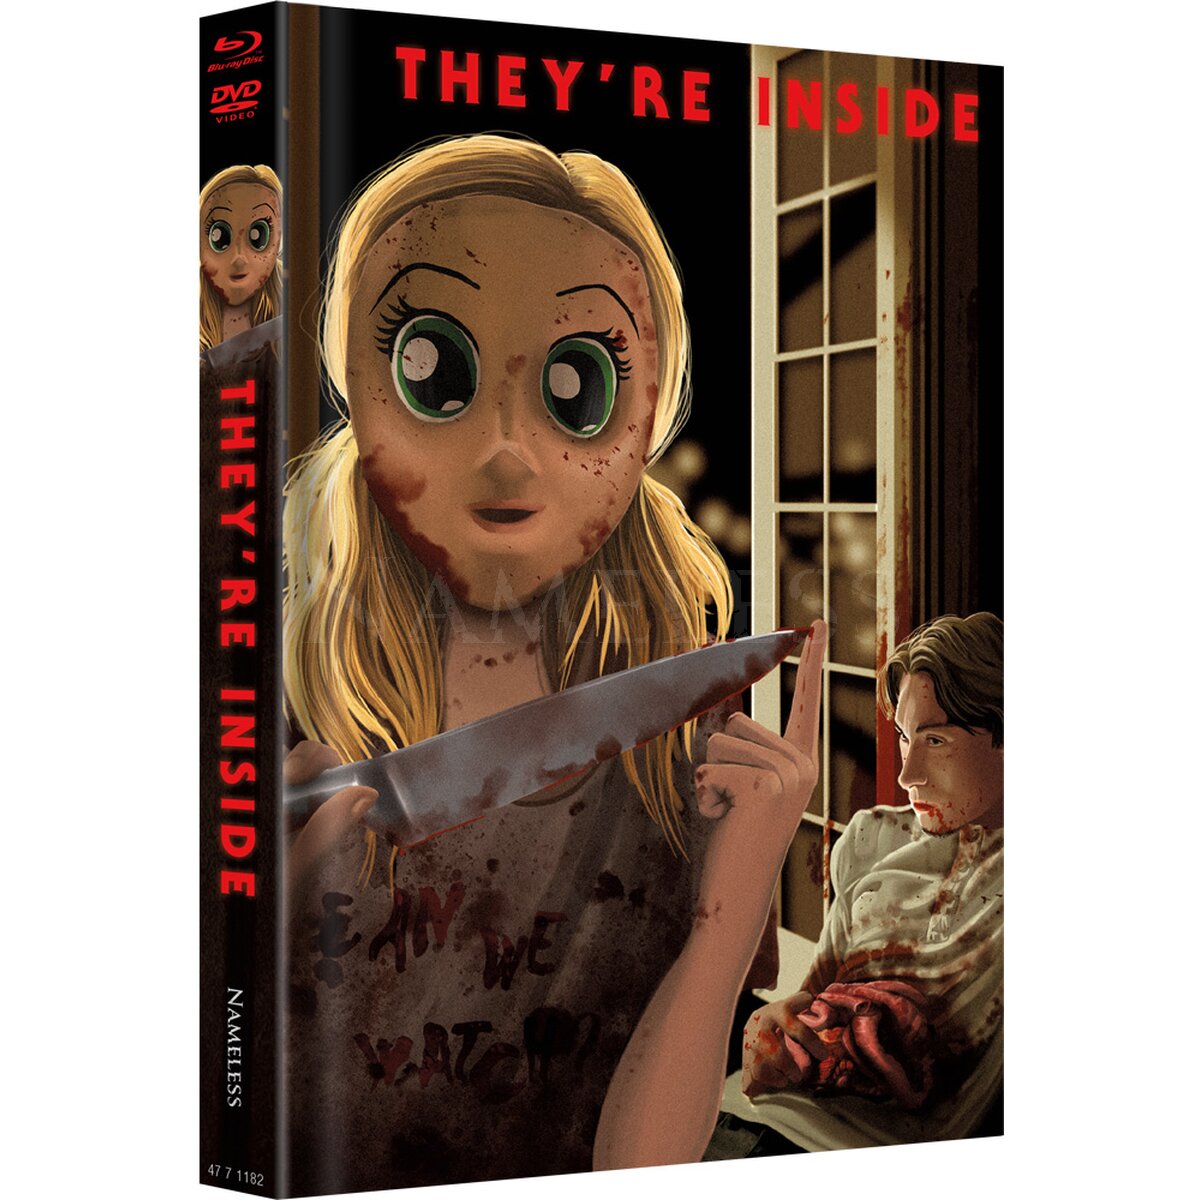 THEY ARE INSIDE – COVER B – ARTWORK